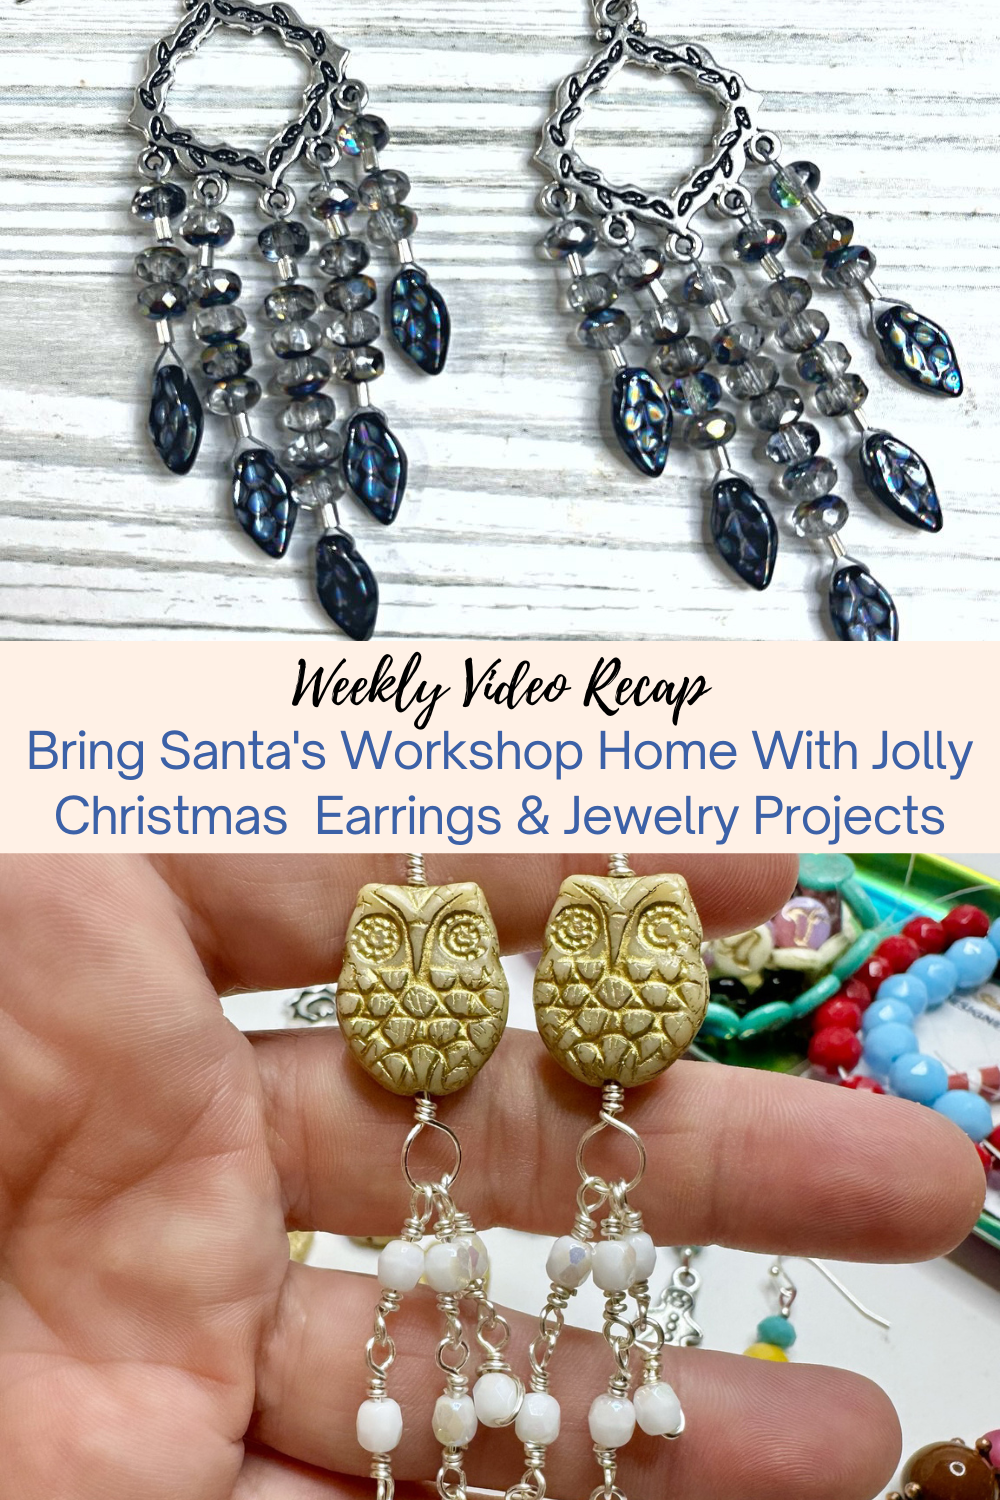 Bring Santa's Workshop Home With Jolly Christmas Earrings & Jewelry Projects Collage